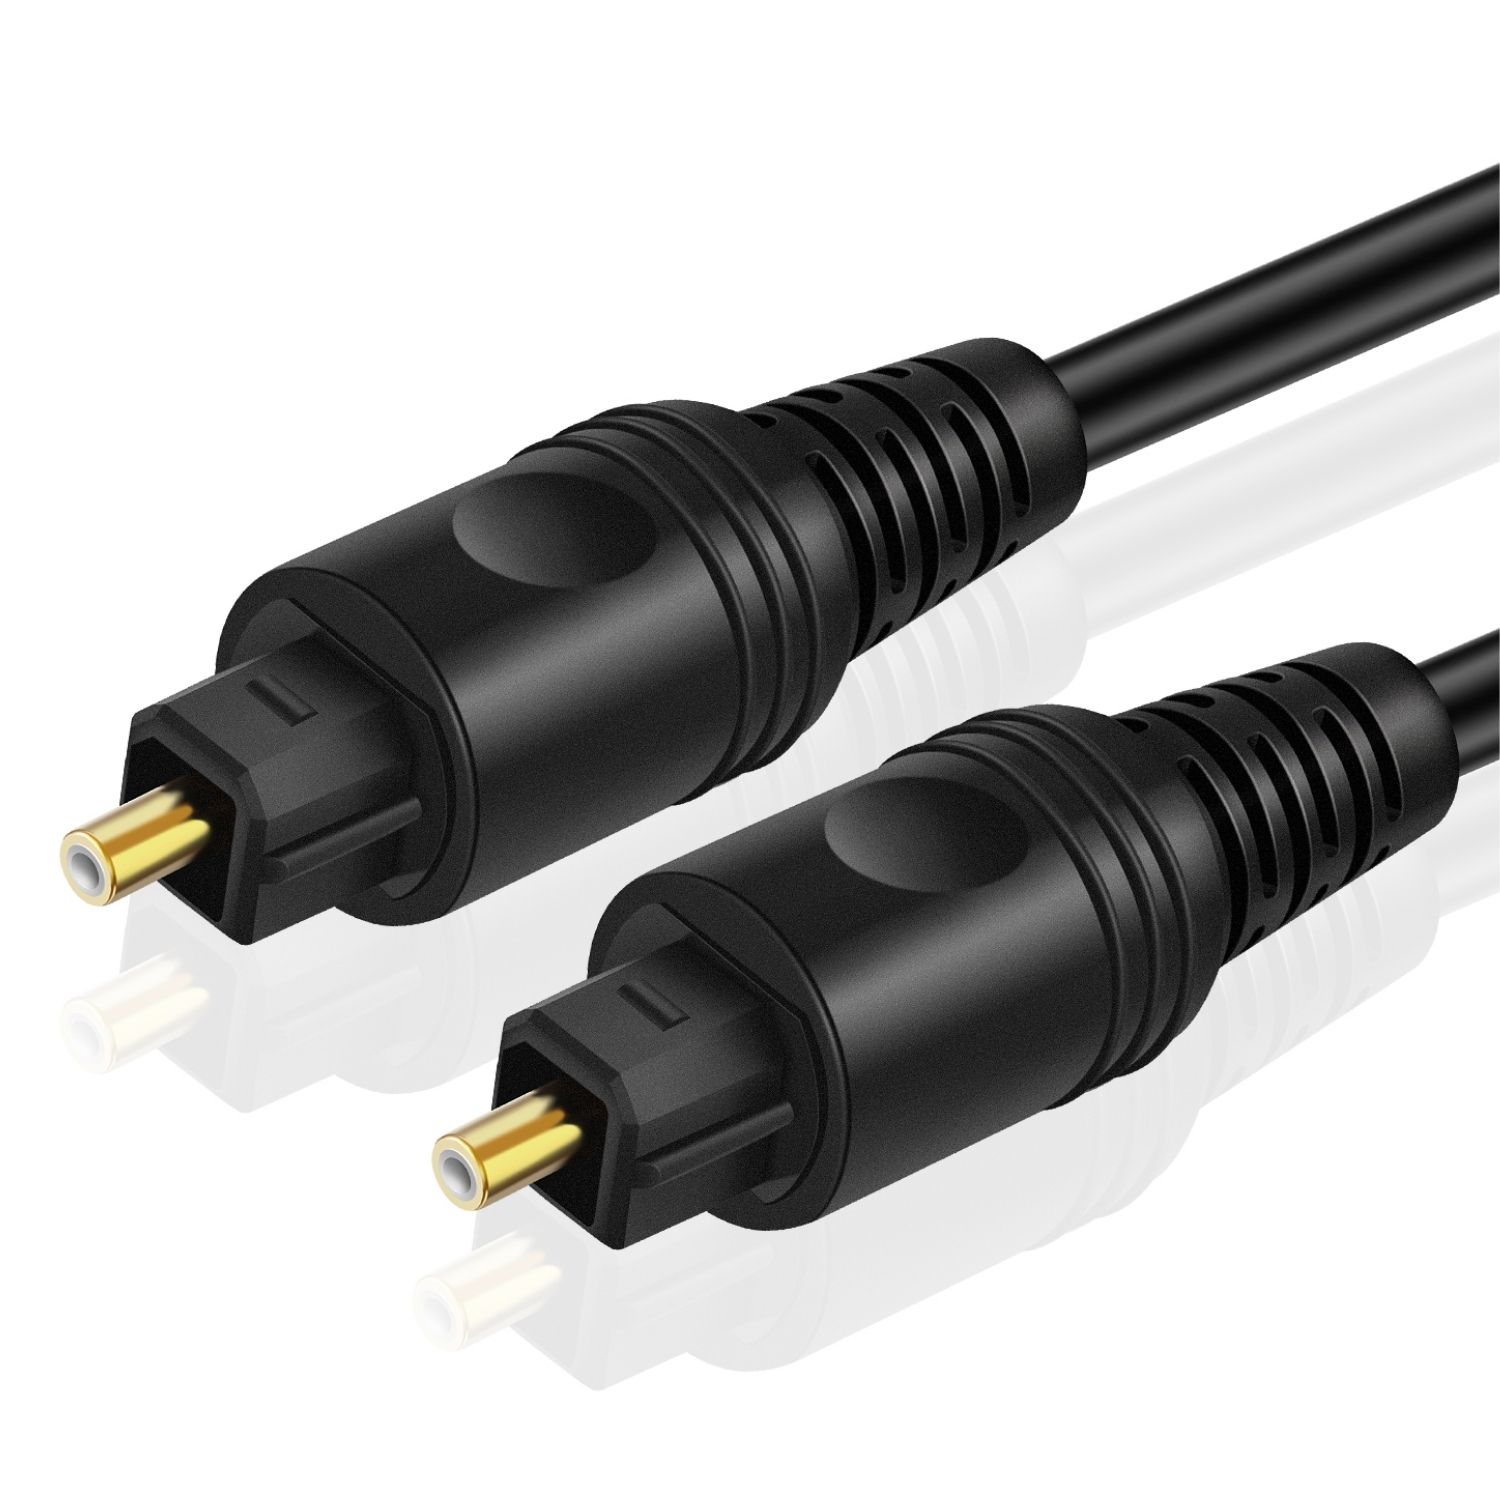 Digital Optical Audio Cable 35 Feet S/PDIF Fiber Optic Cable Toslink TV Optical Cable for Soundbar, Home Theater, Speaker Wire, TV, PS4, Xbox Male to Male Gold Connectors & Strain-Relief Cord